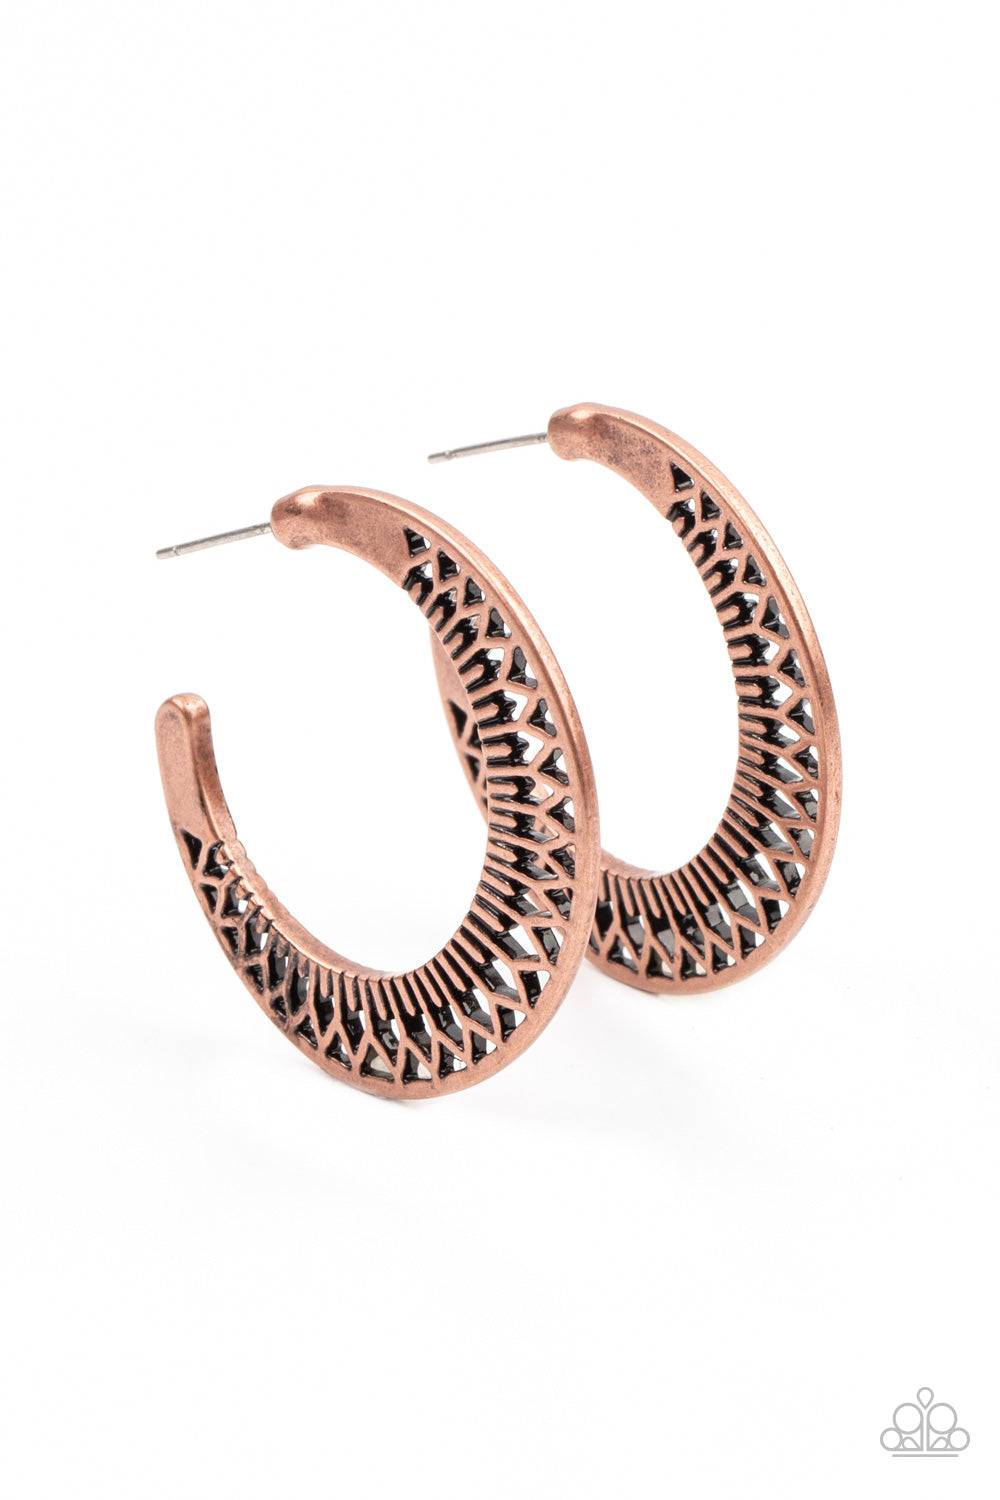 shop-sassy-affordable- bada-bloom-copper-paparazzi-accessories